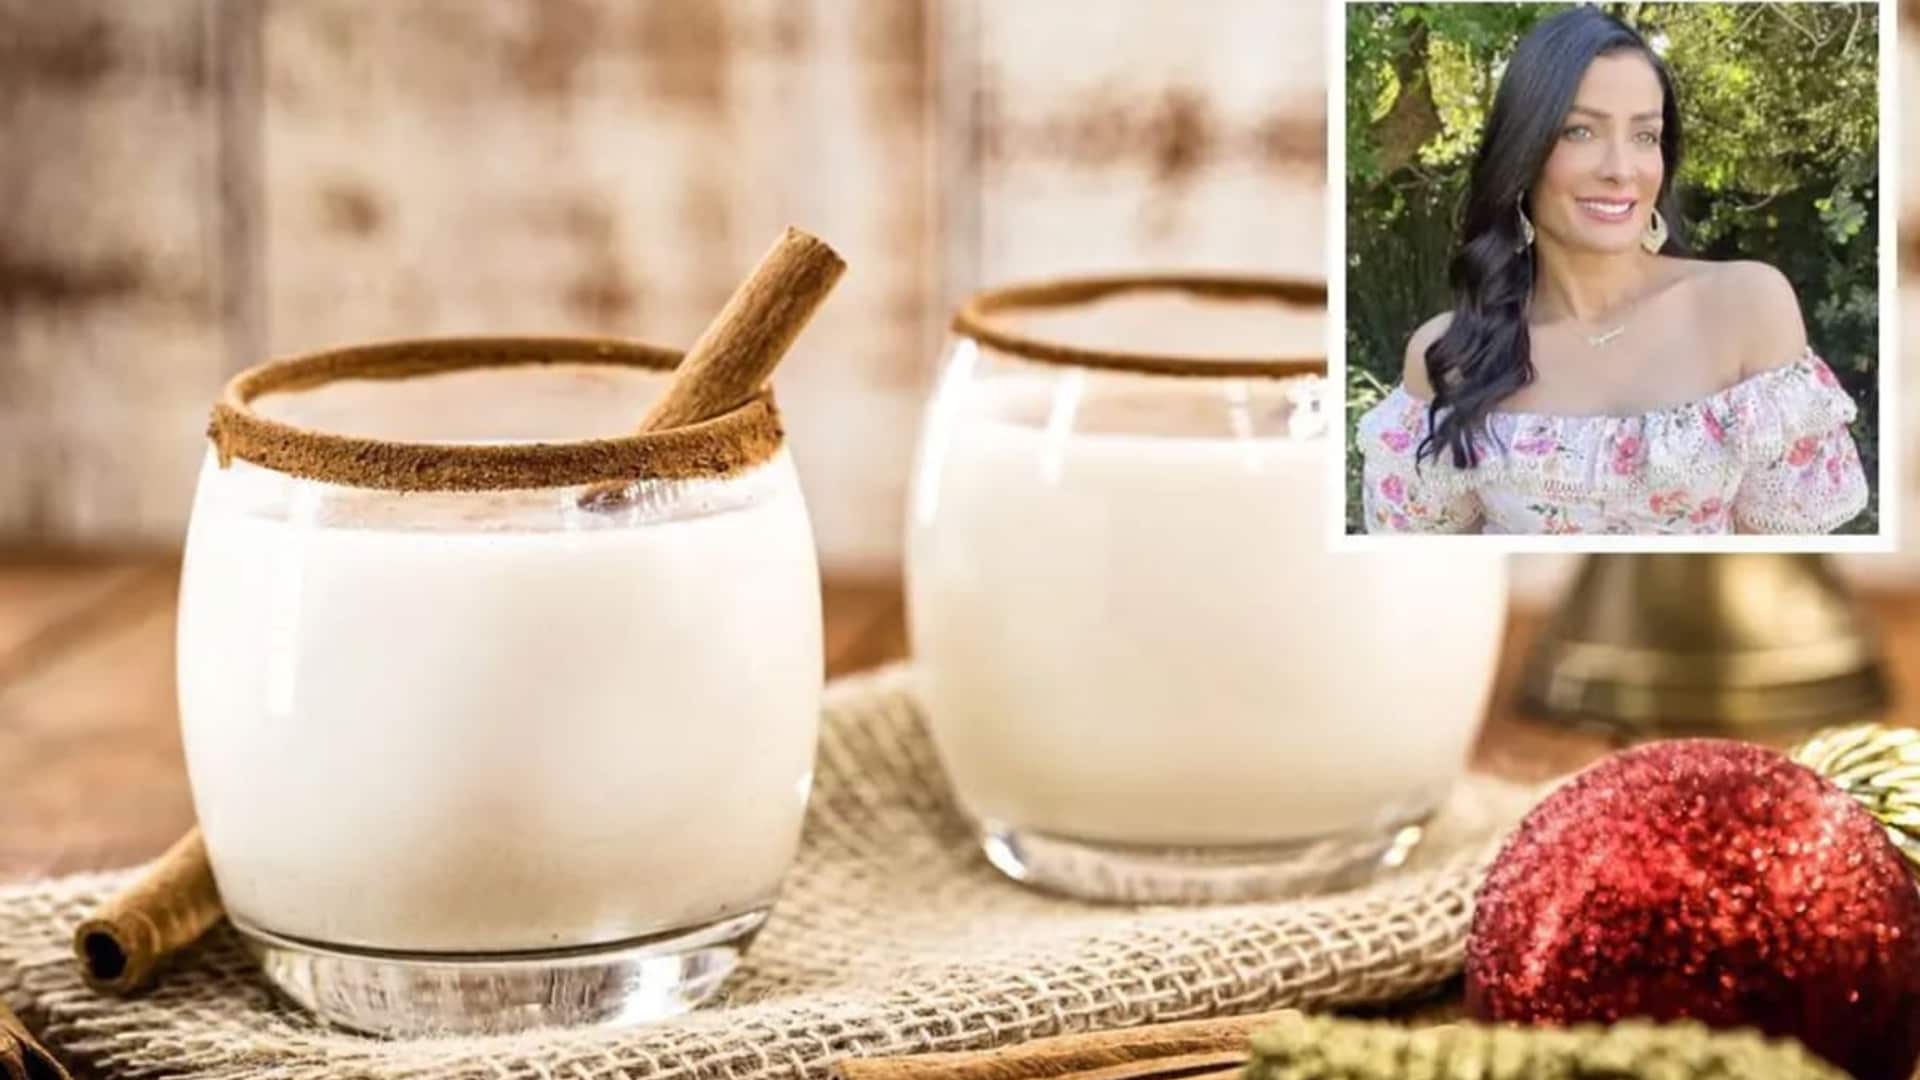 The recipe of the delicious Puerto Rican Coquito From Dayanara Torres